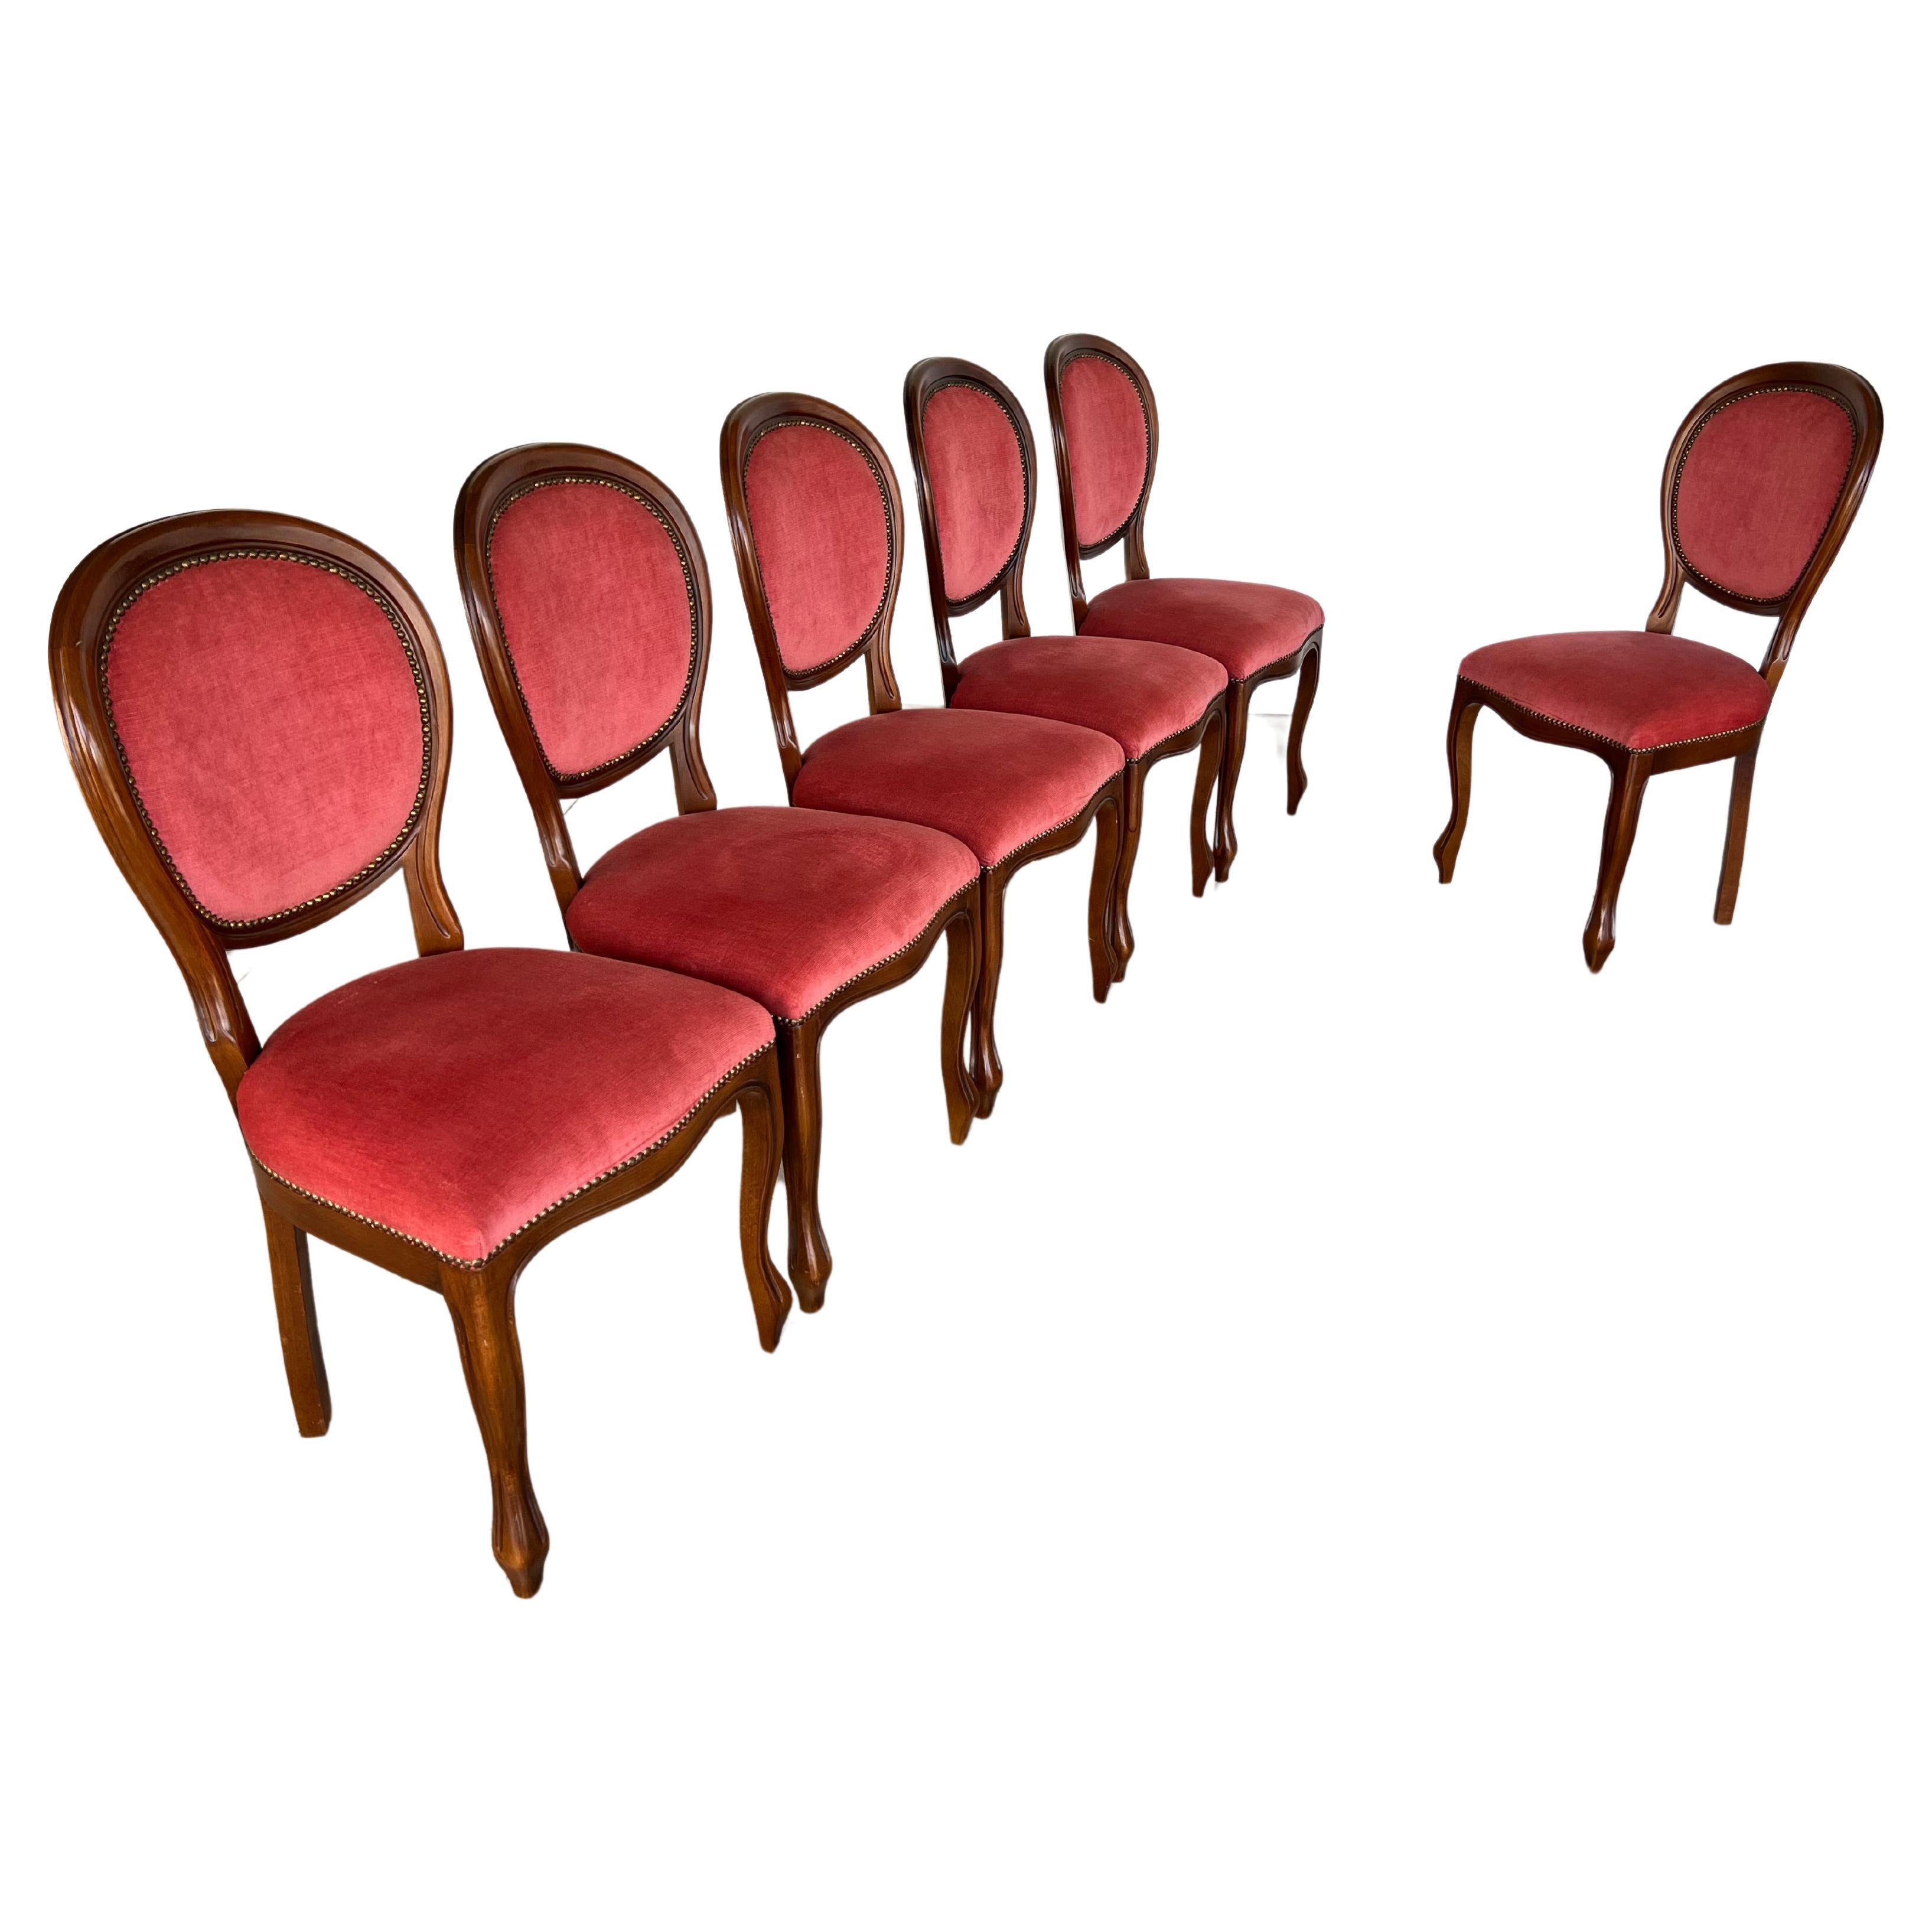 Vintage French Louis XV Medallion Back Side Dining Chairs - Set of 6